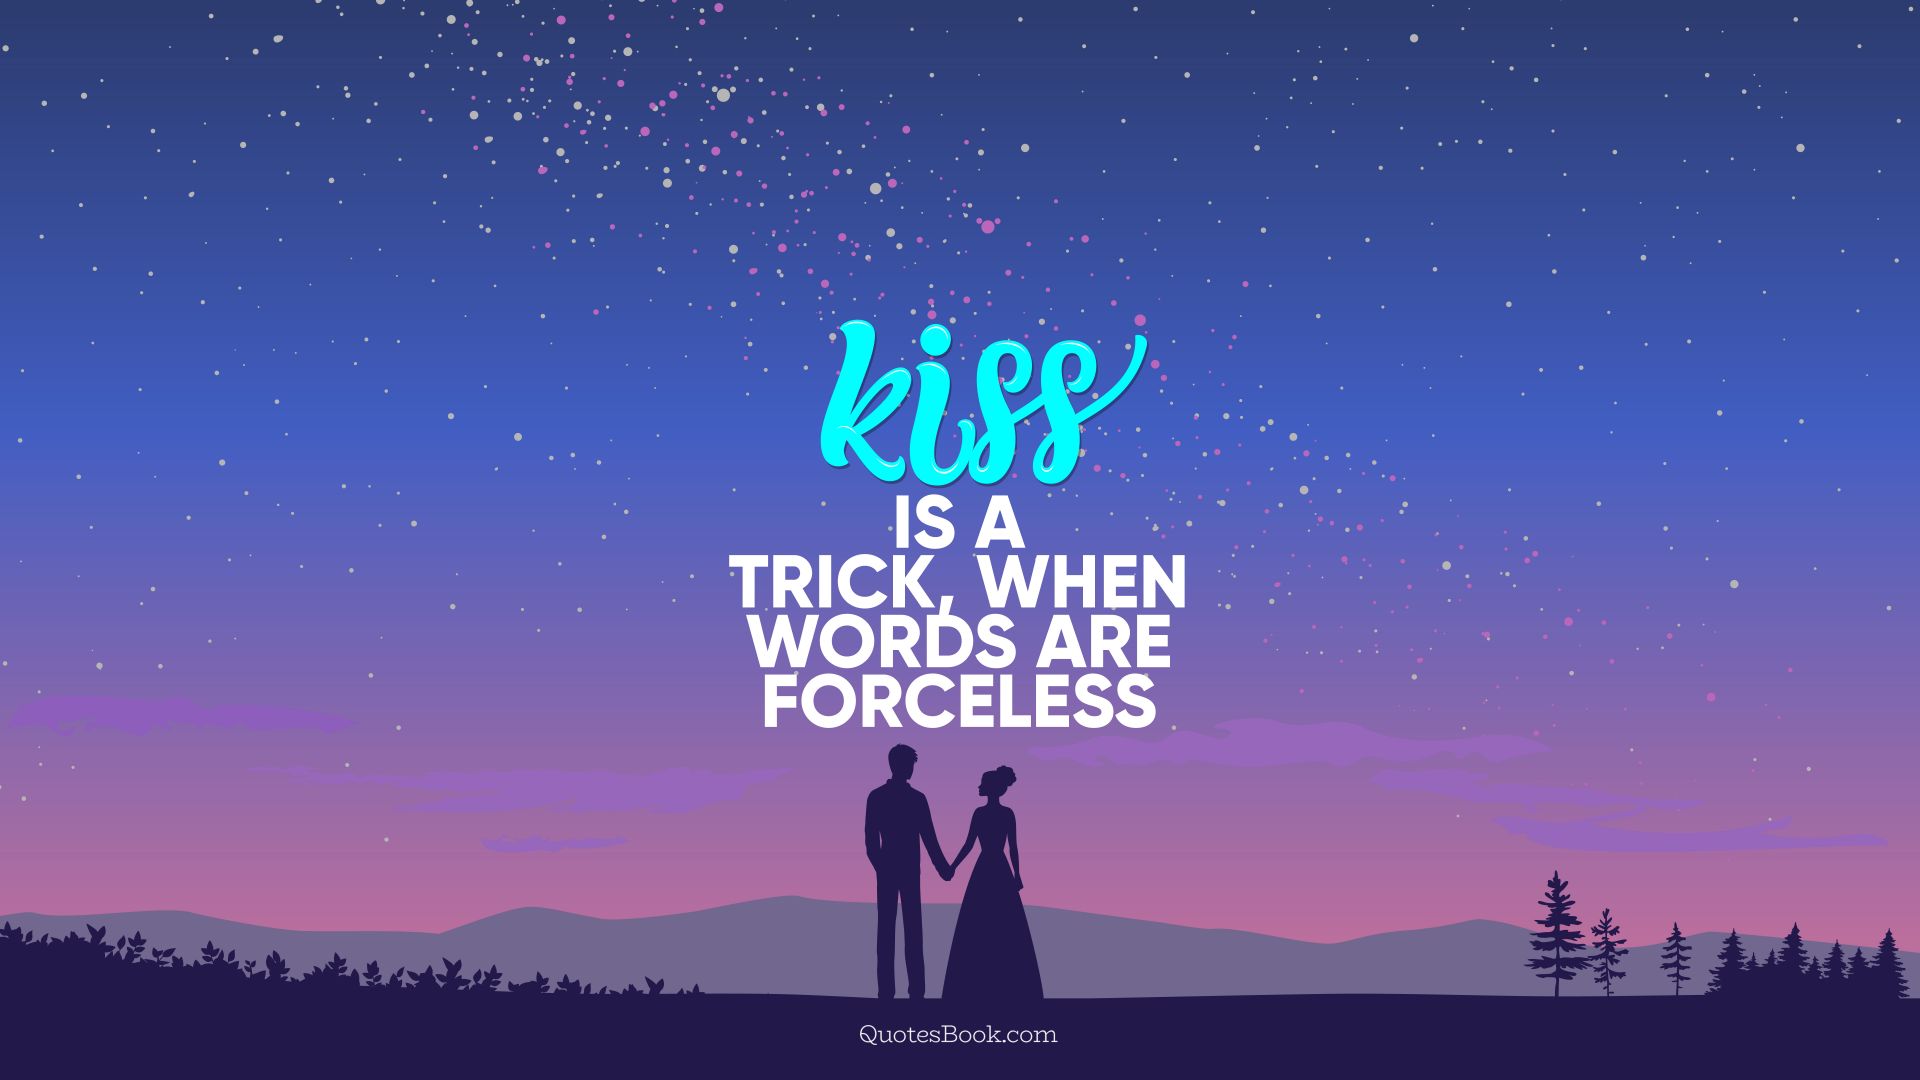 Kiss is a trick, when words are forceless. - Quote by QuotesBook